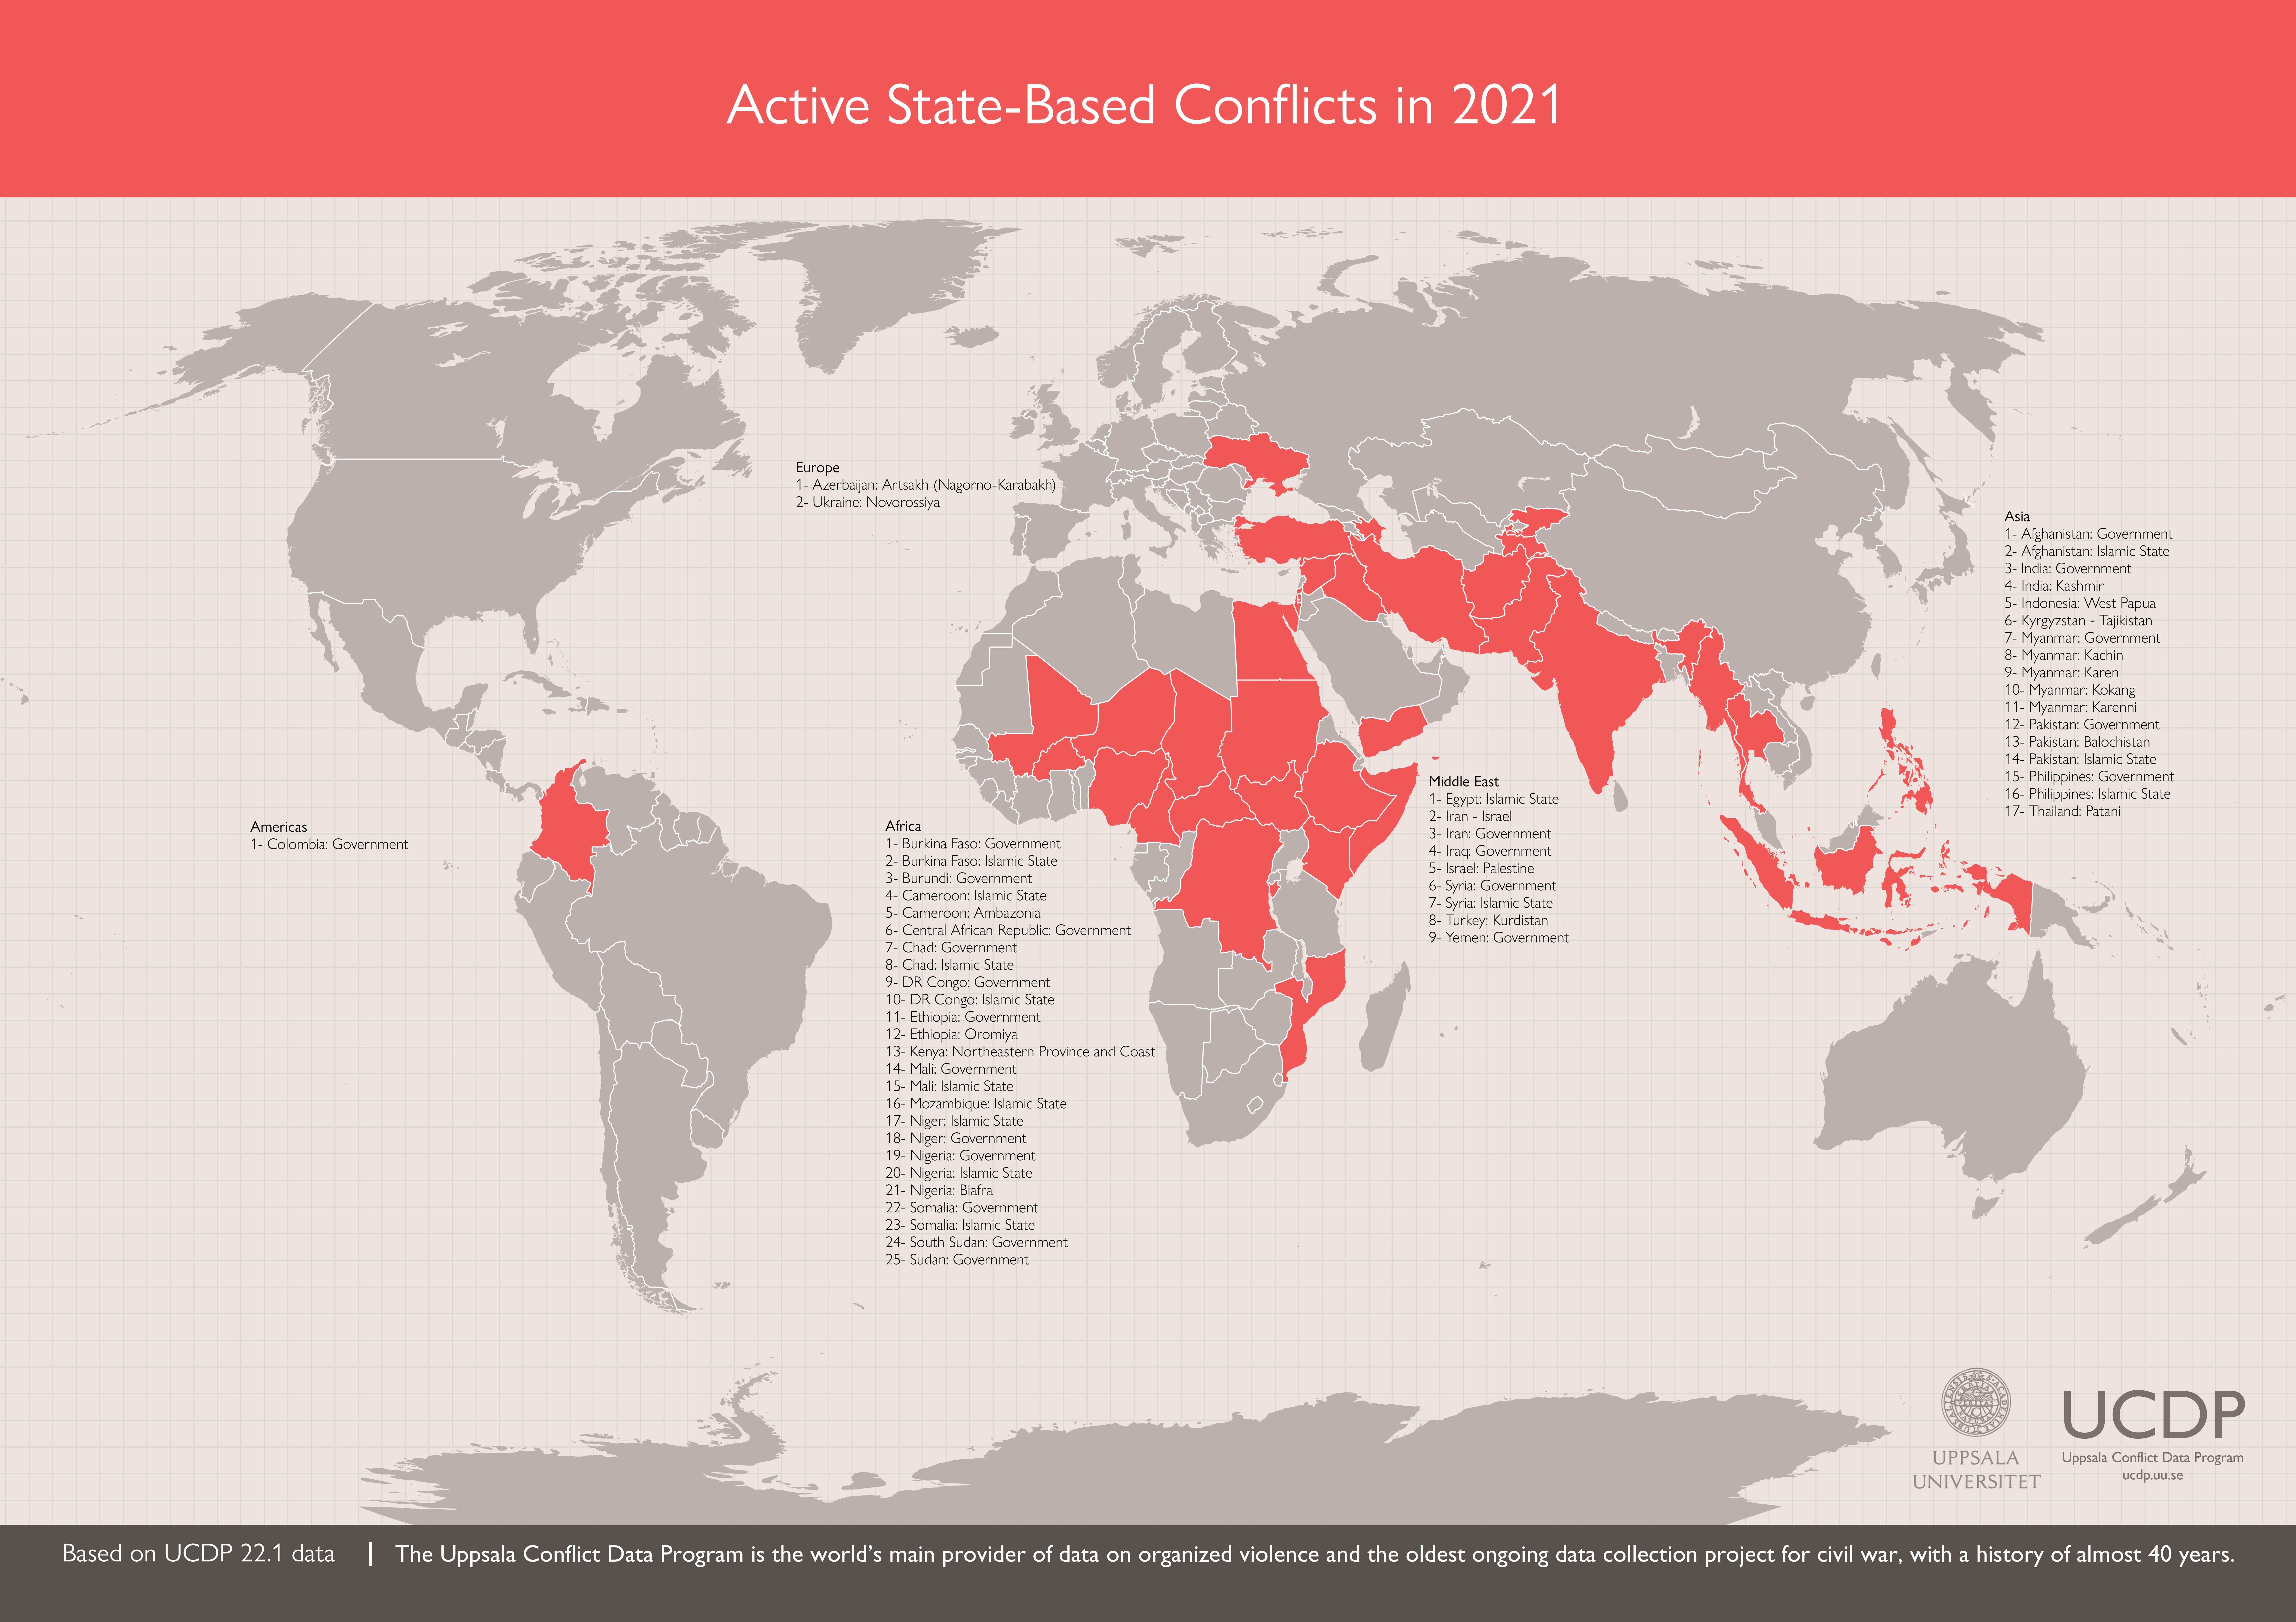 UCDP GED map: Active state-based conflicts in 2021